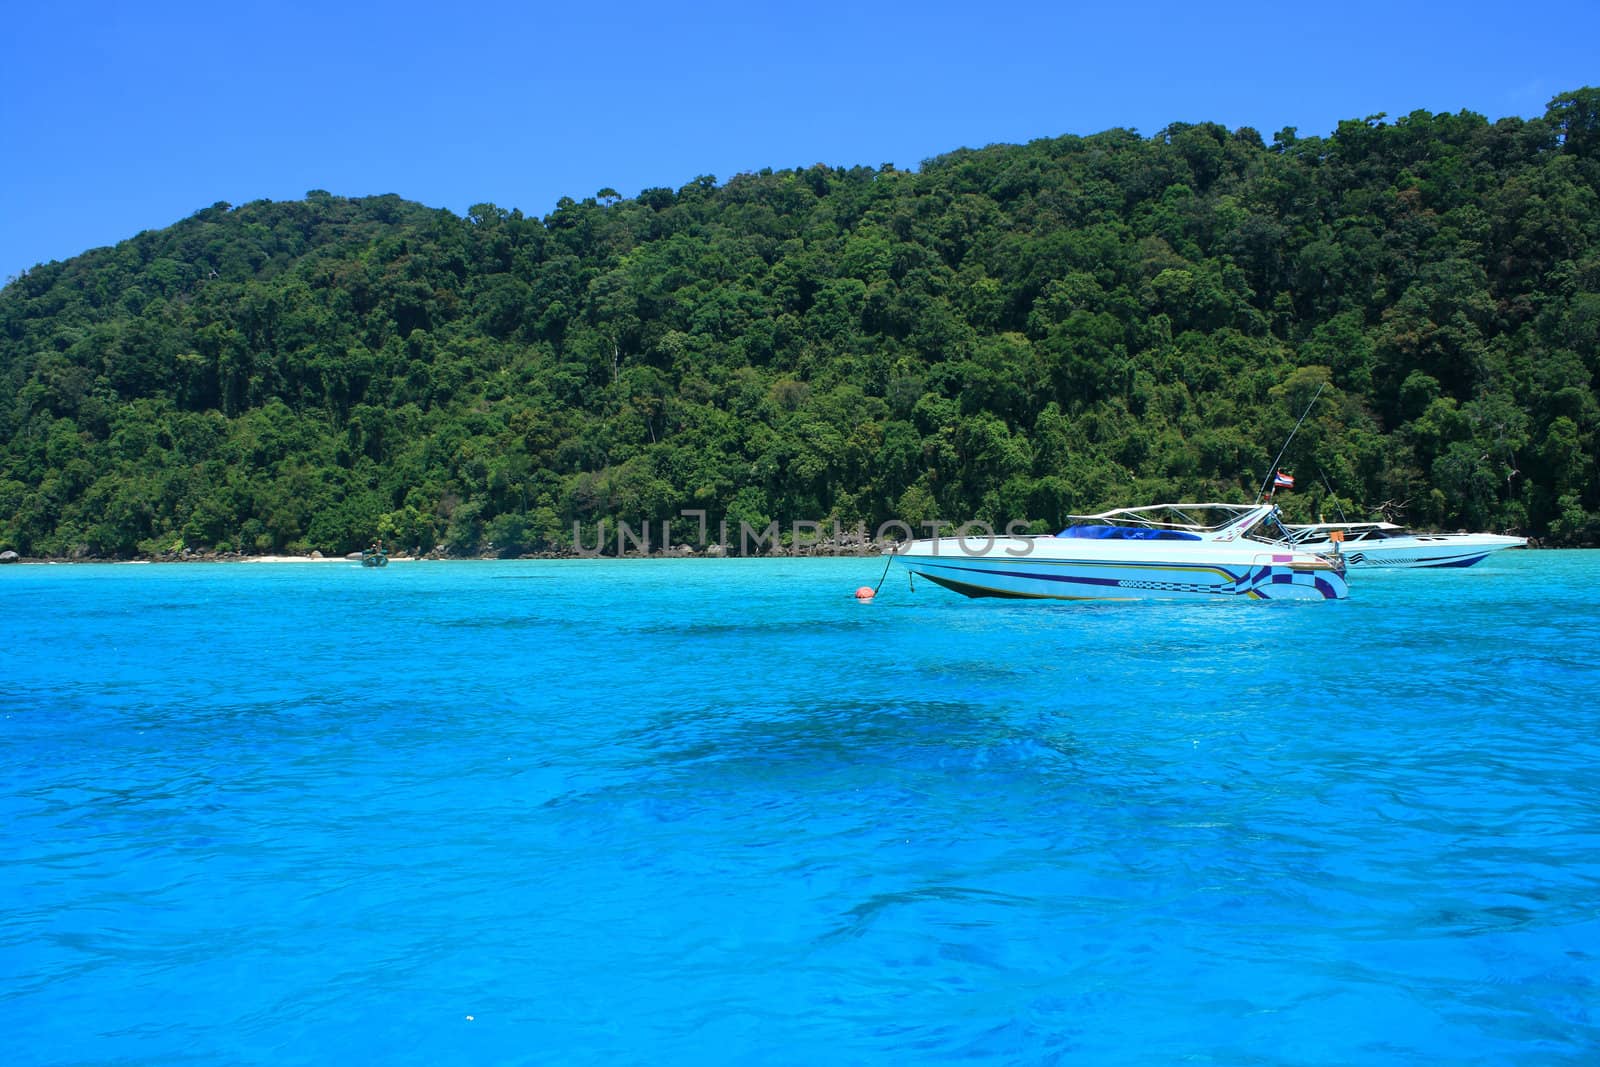 Boat on the blue sea, Koh Surin national park, Thailand